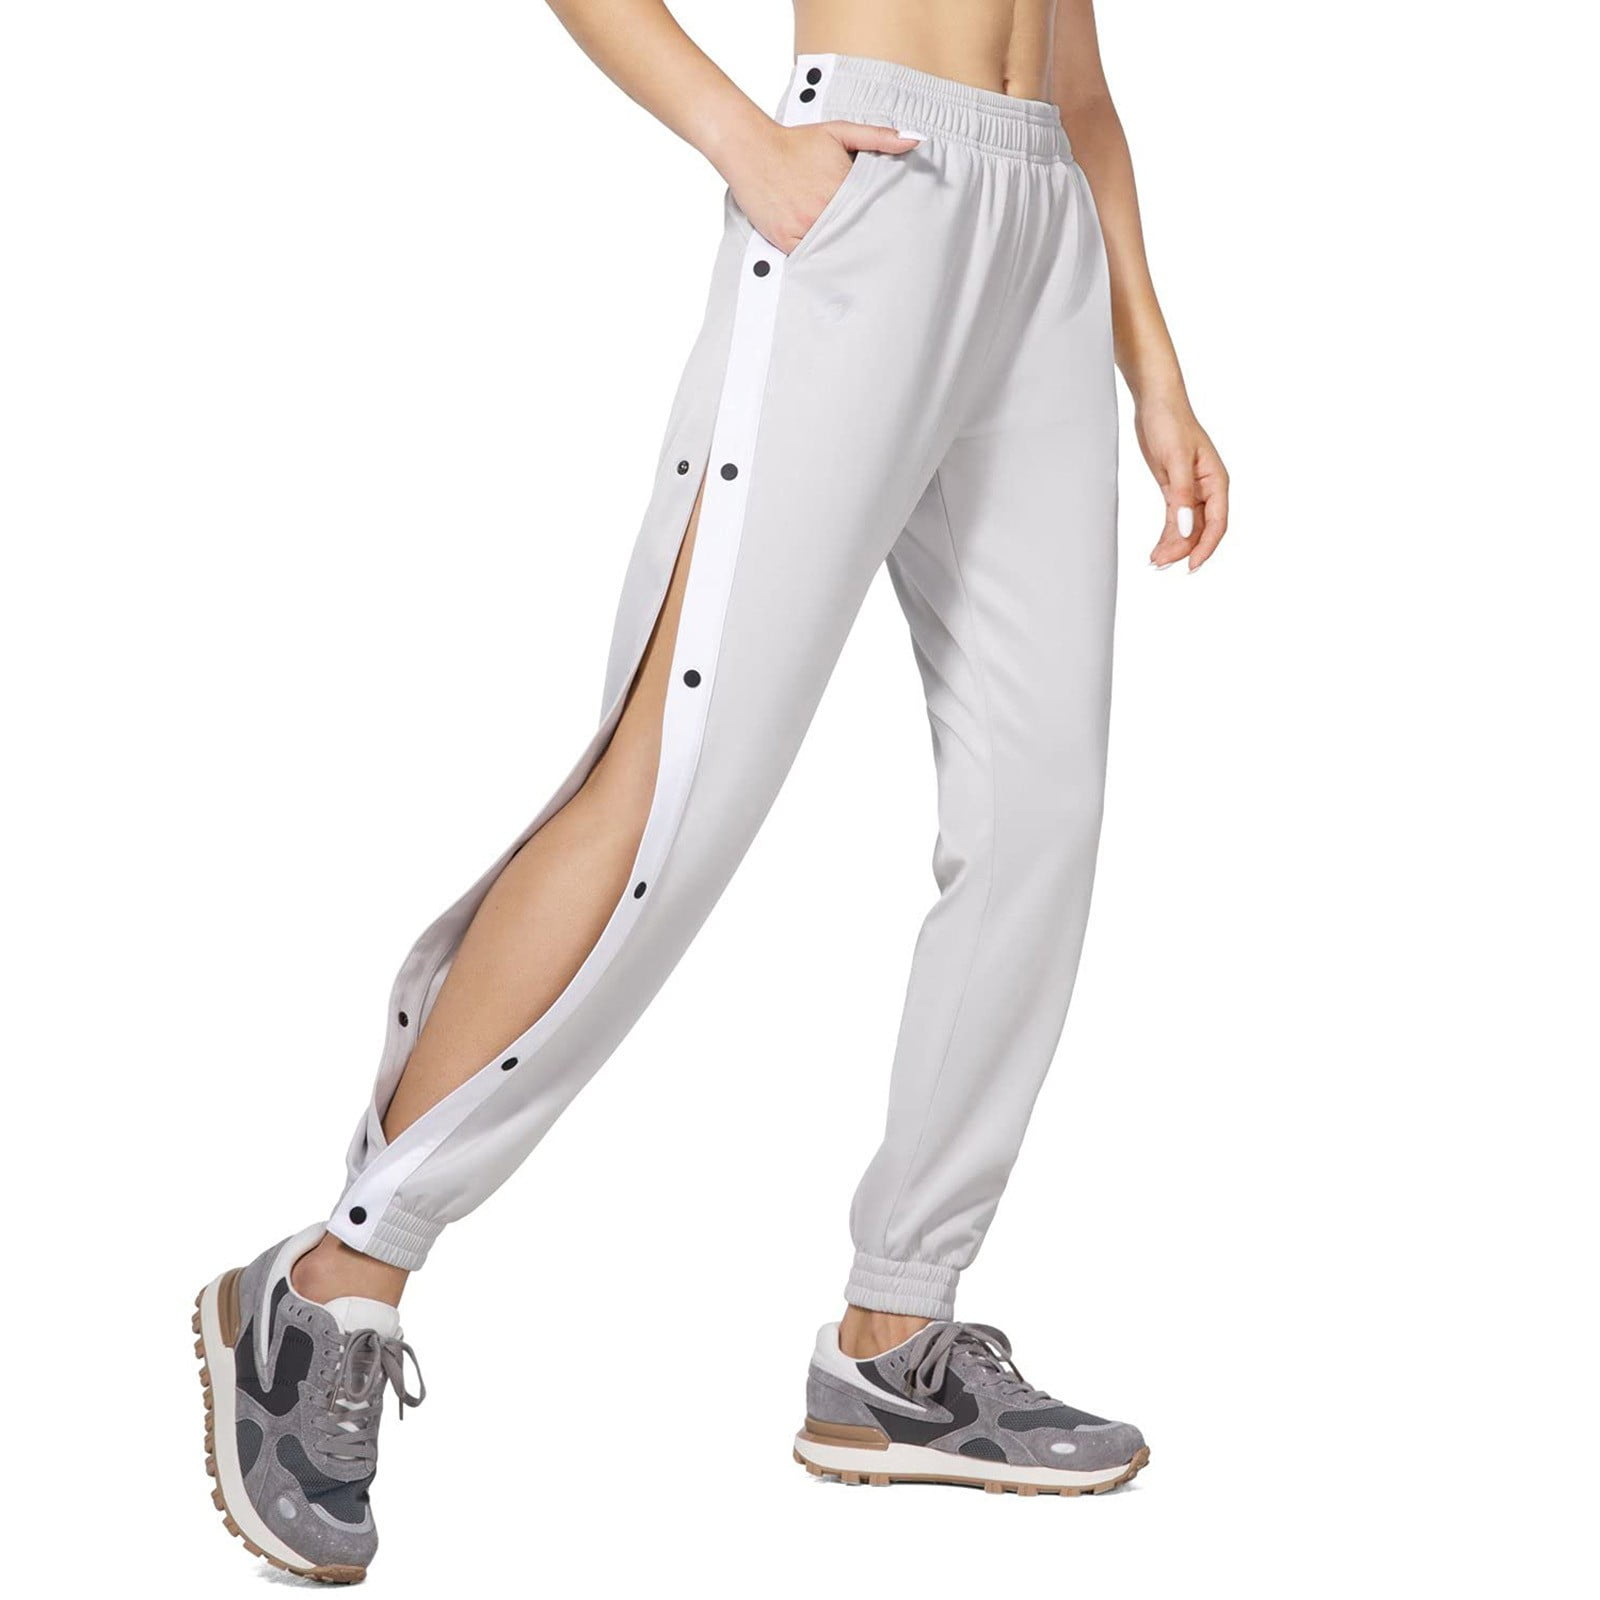 HSMQHJWE Sweatpants For Women Womens Joggers With Pockets Lounge Pants For  Yoga Workout Running Sweat Pants Women Casual 